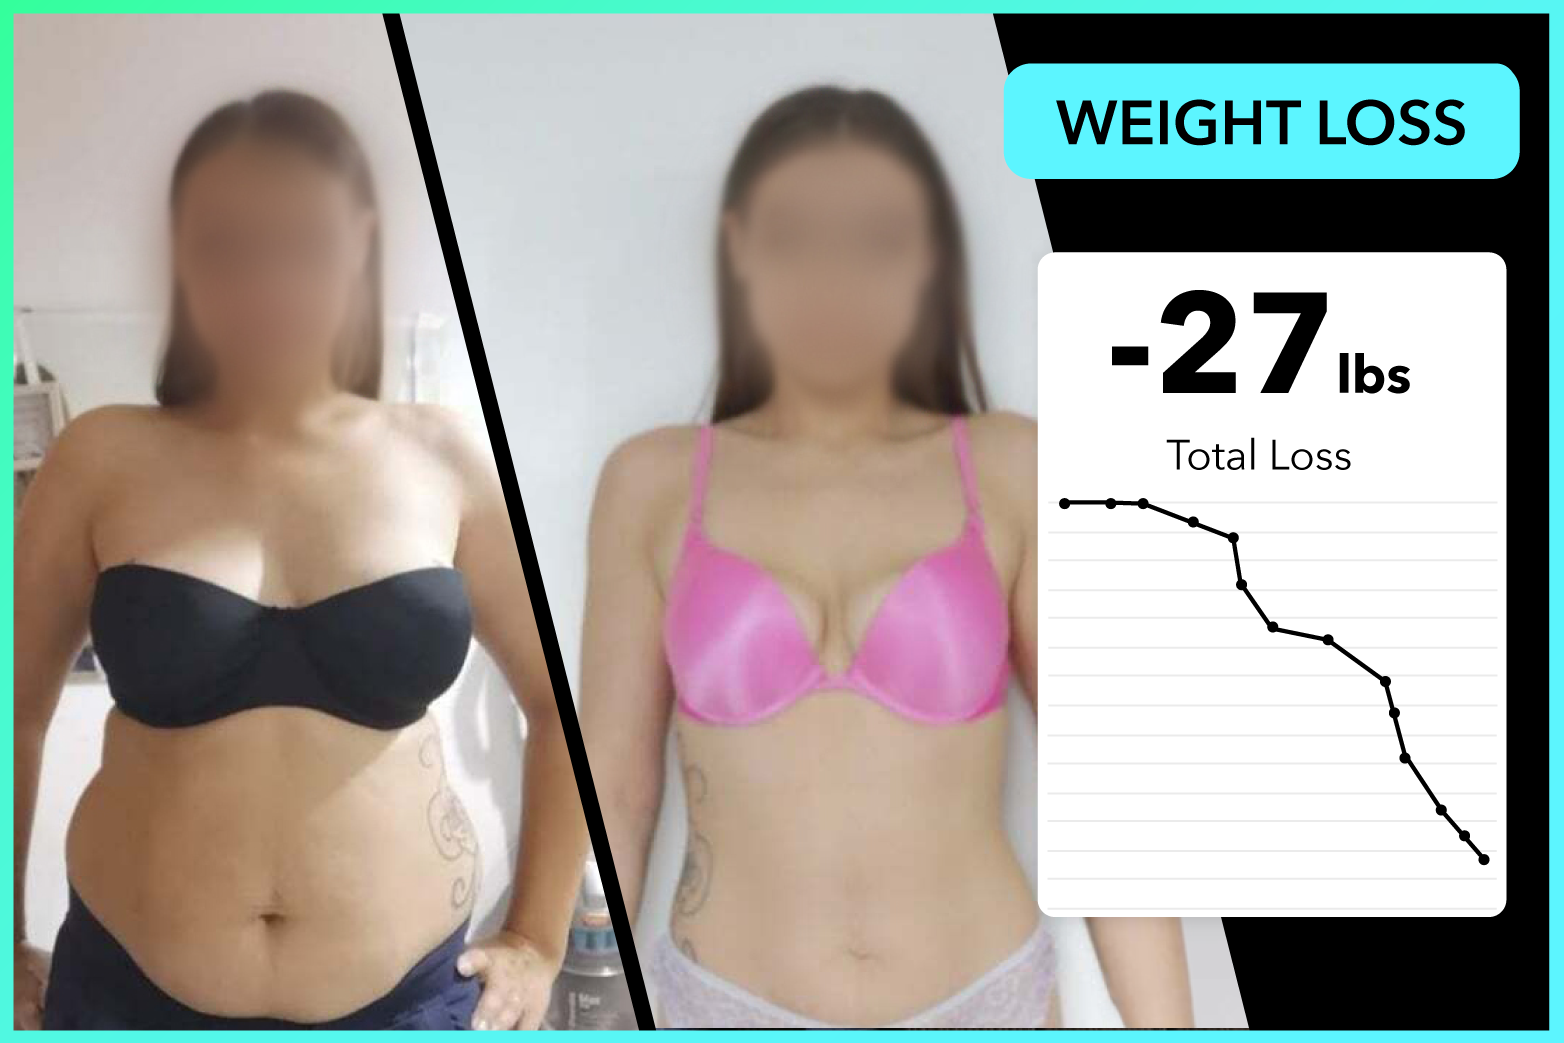 Amy lost 27lbs with Team RH!